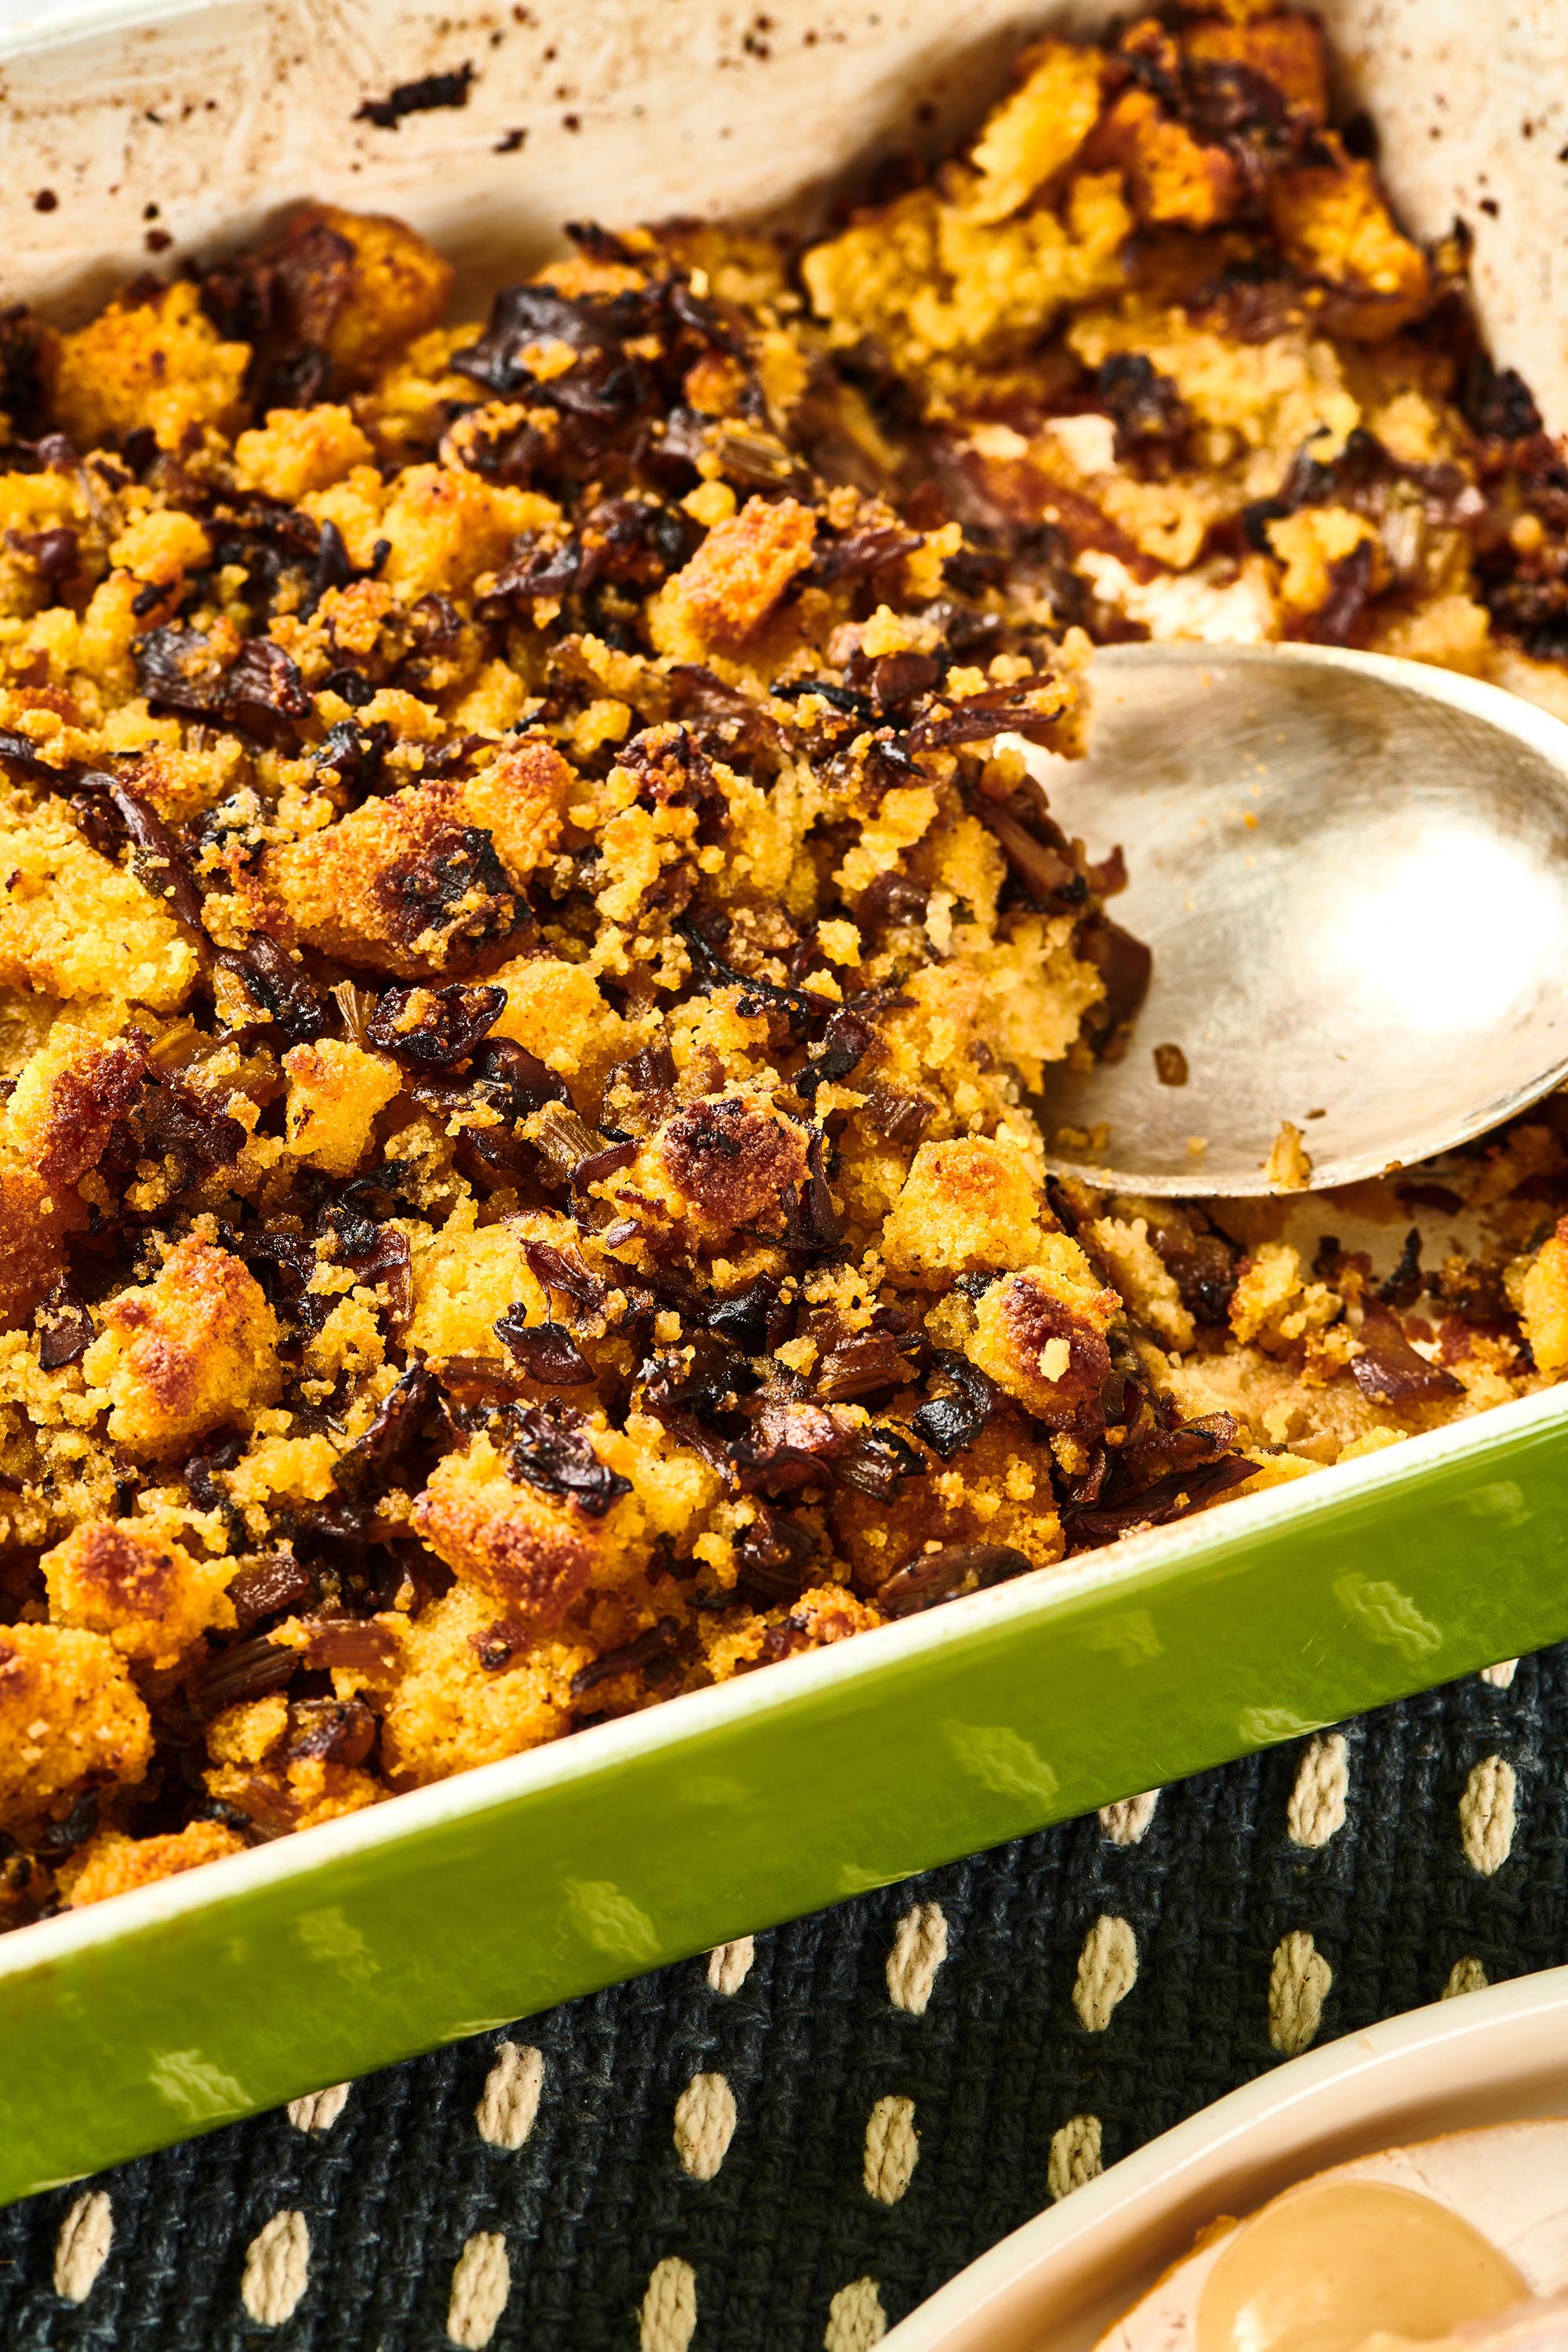 Spoon scooping Cornbread Dressing from a green baking pan.